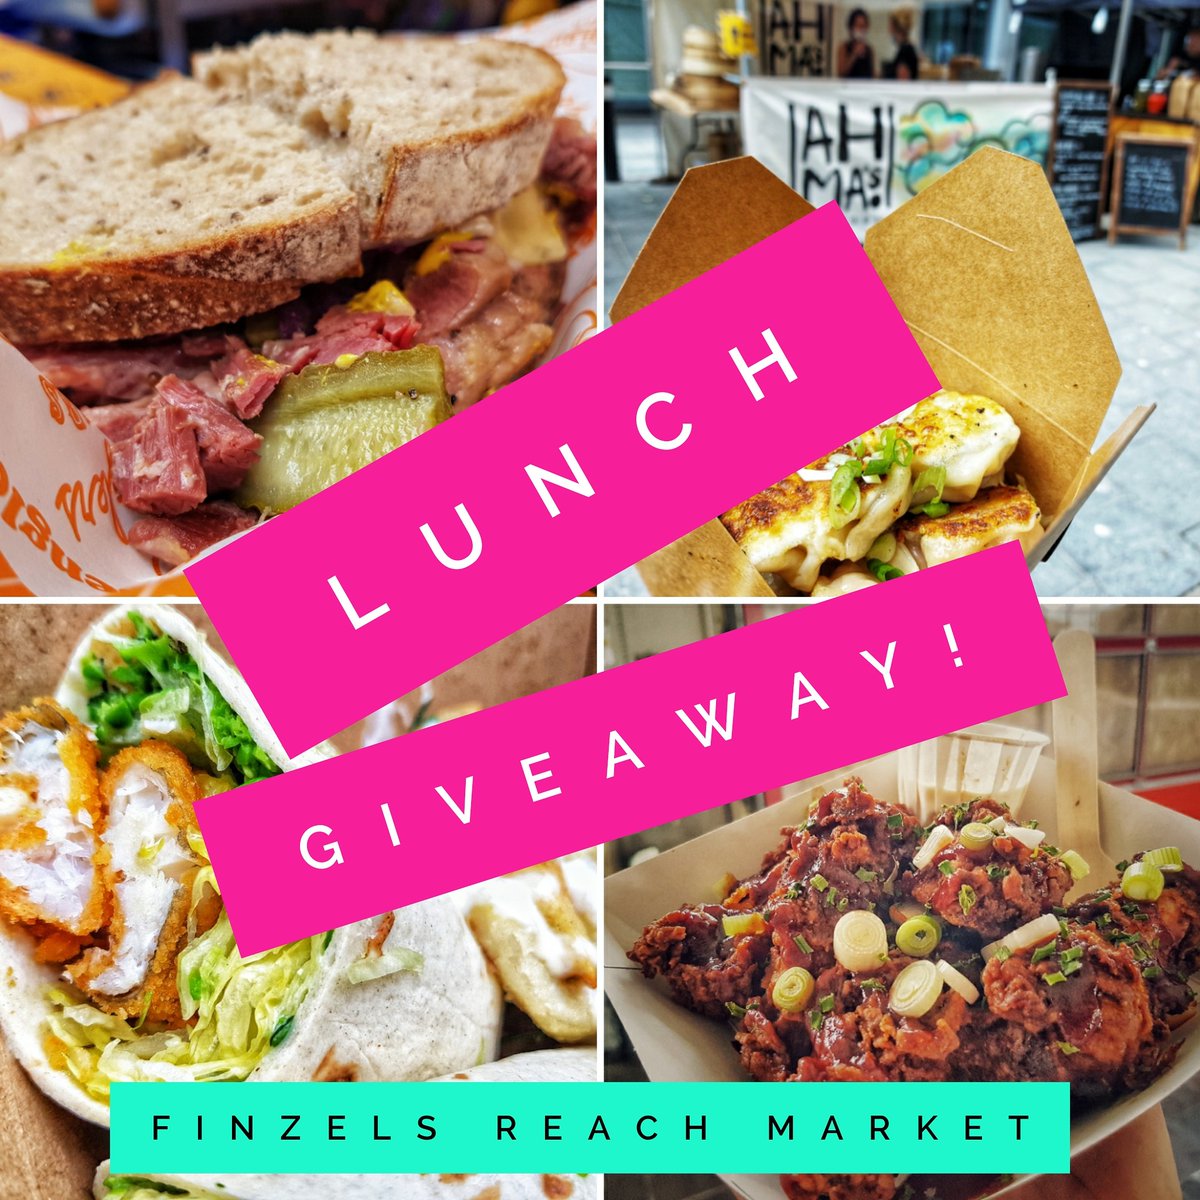 To celebrate the launch of our new Wednesday market tomorrow, we're giving away some free street food! Details on how to take part in our lucky dip here instagram.com/sophiebevents/… @FinzelsReach #freestreetfood #marketday #freelunch #bristolmarkets #supportlocal #covidsecureevents